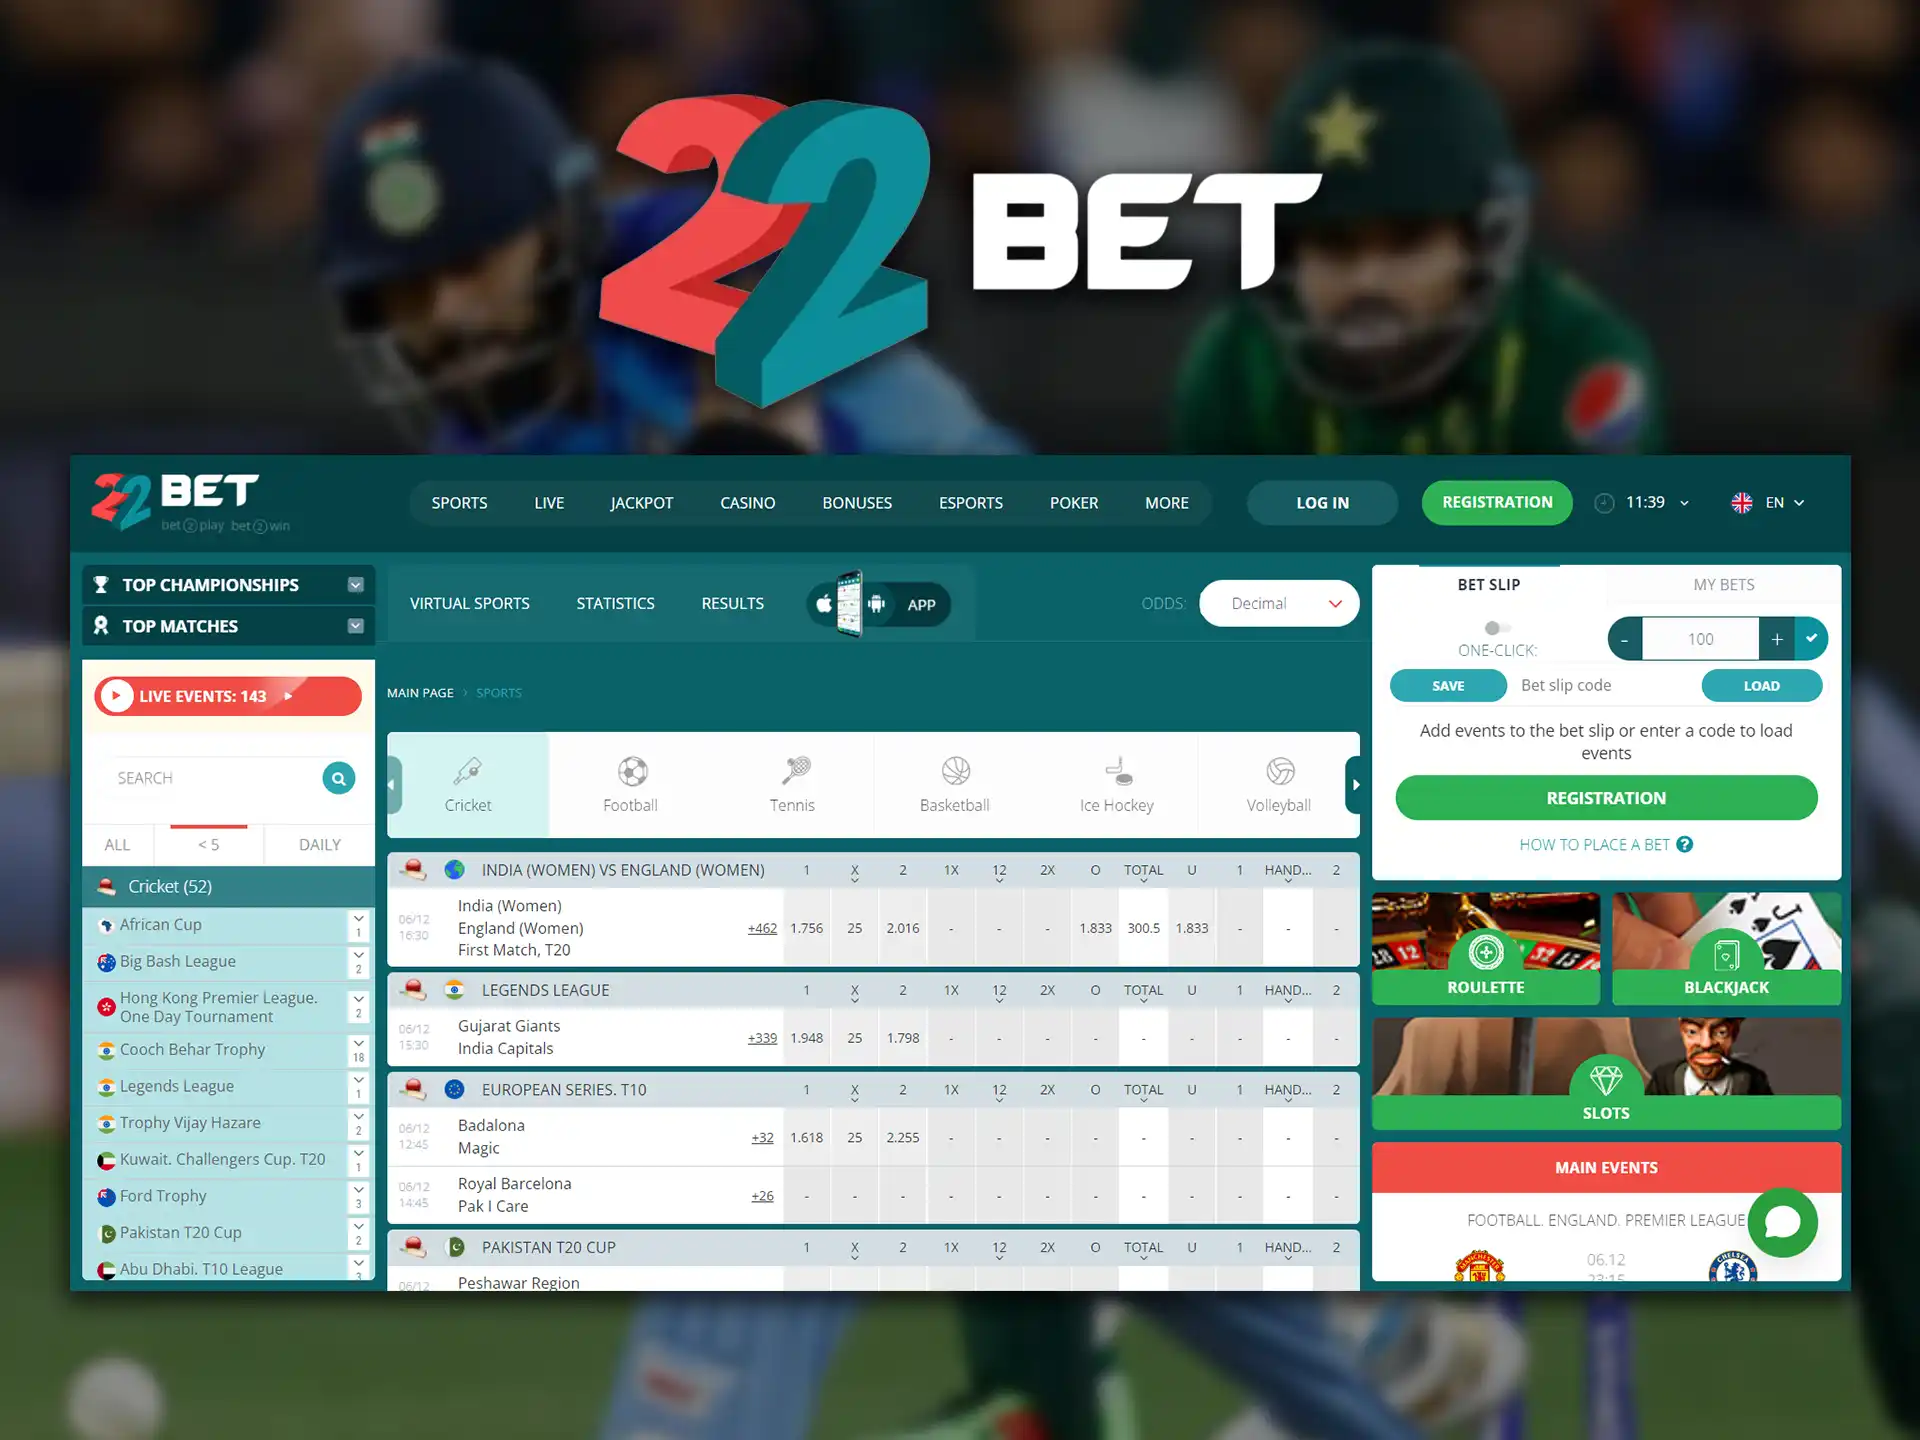 22bet offers betting on cricket and other sports and many bonuses and promotions for players.